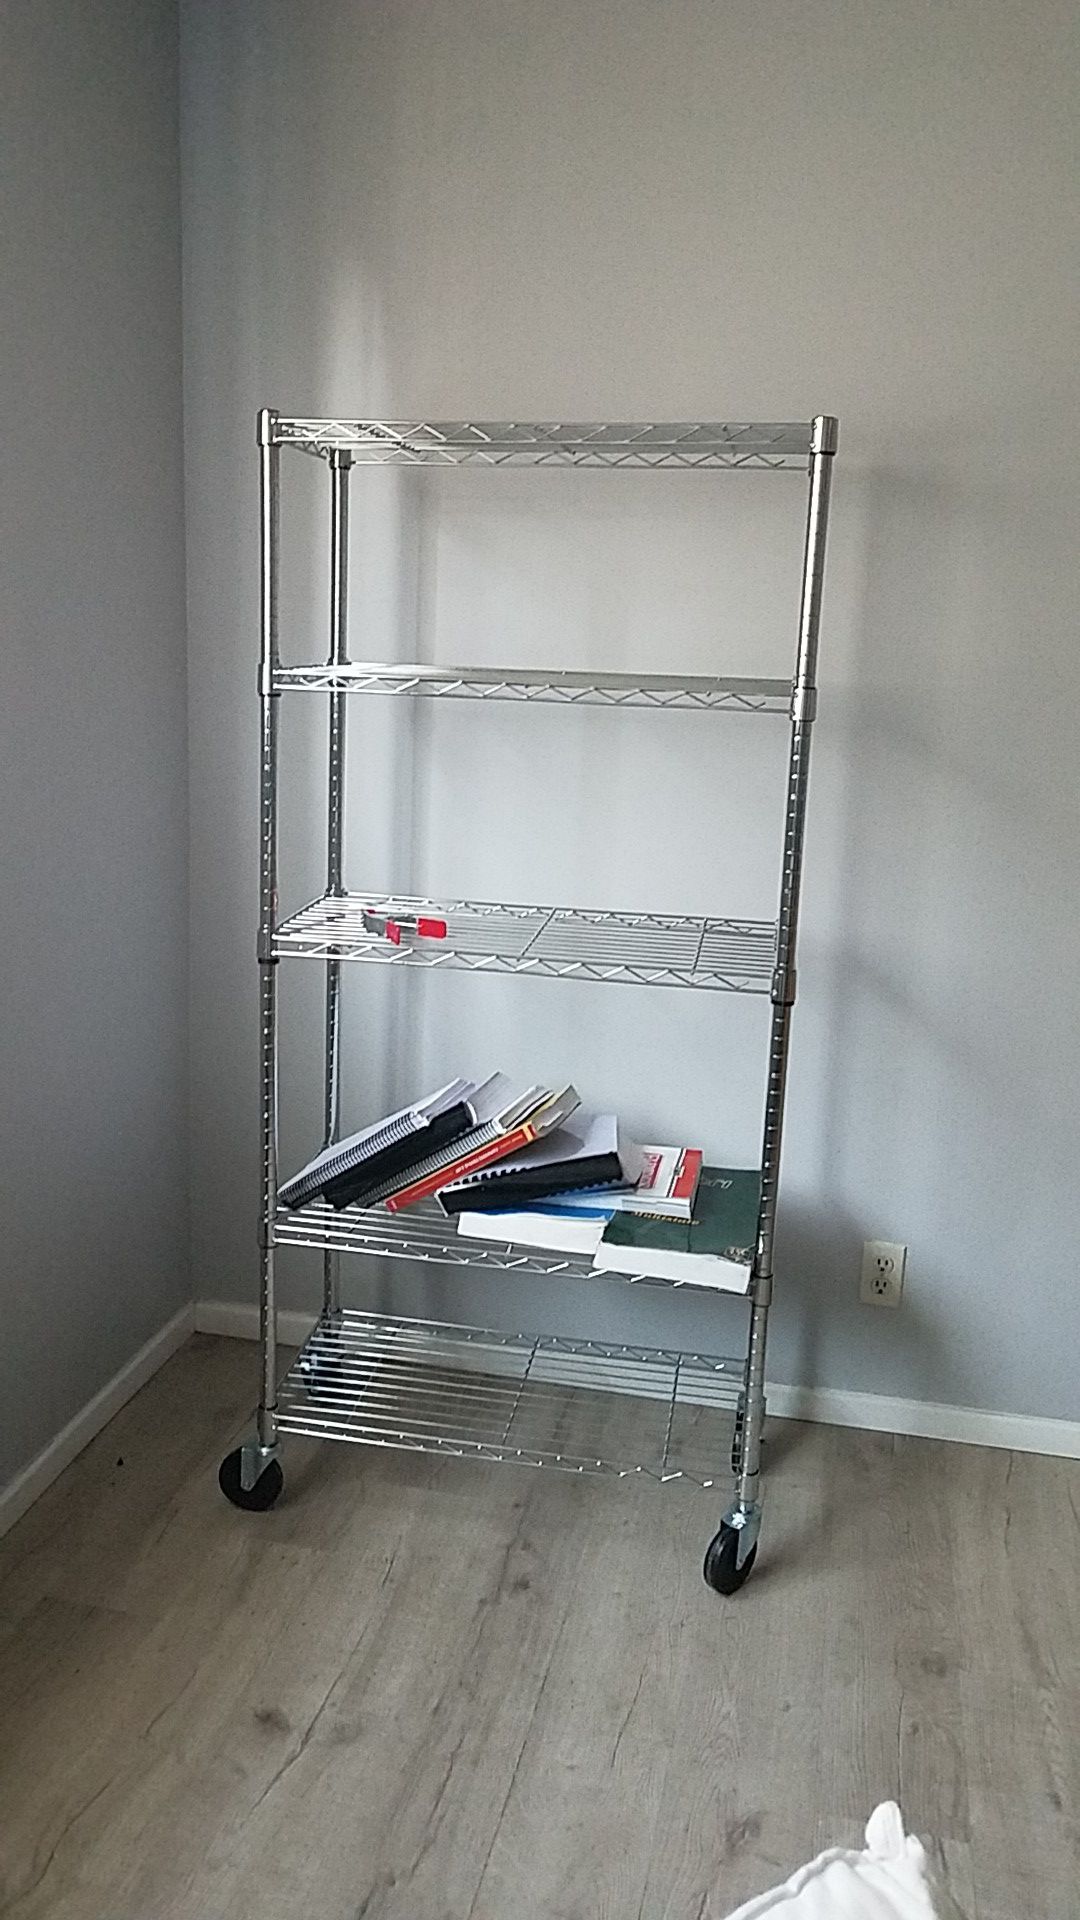 Baker or wire rack on casters